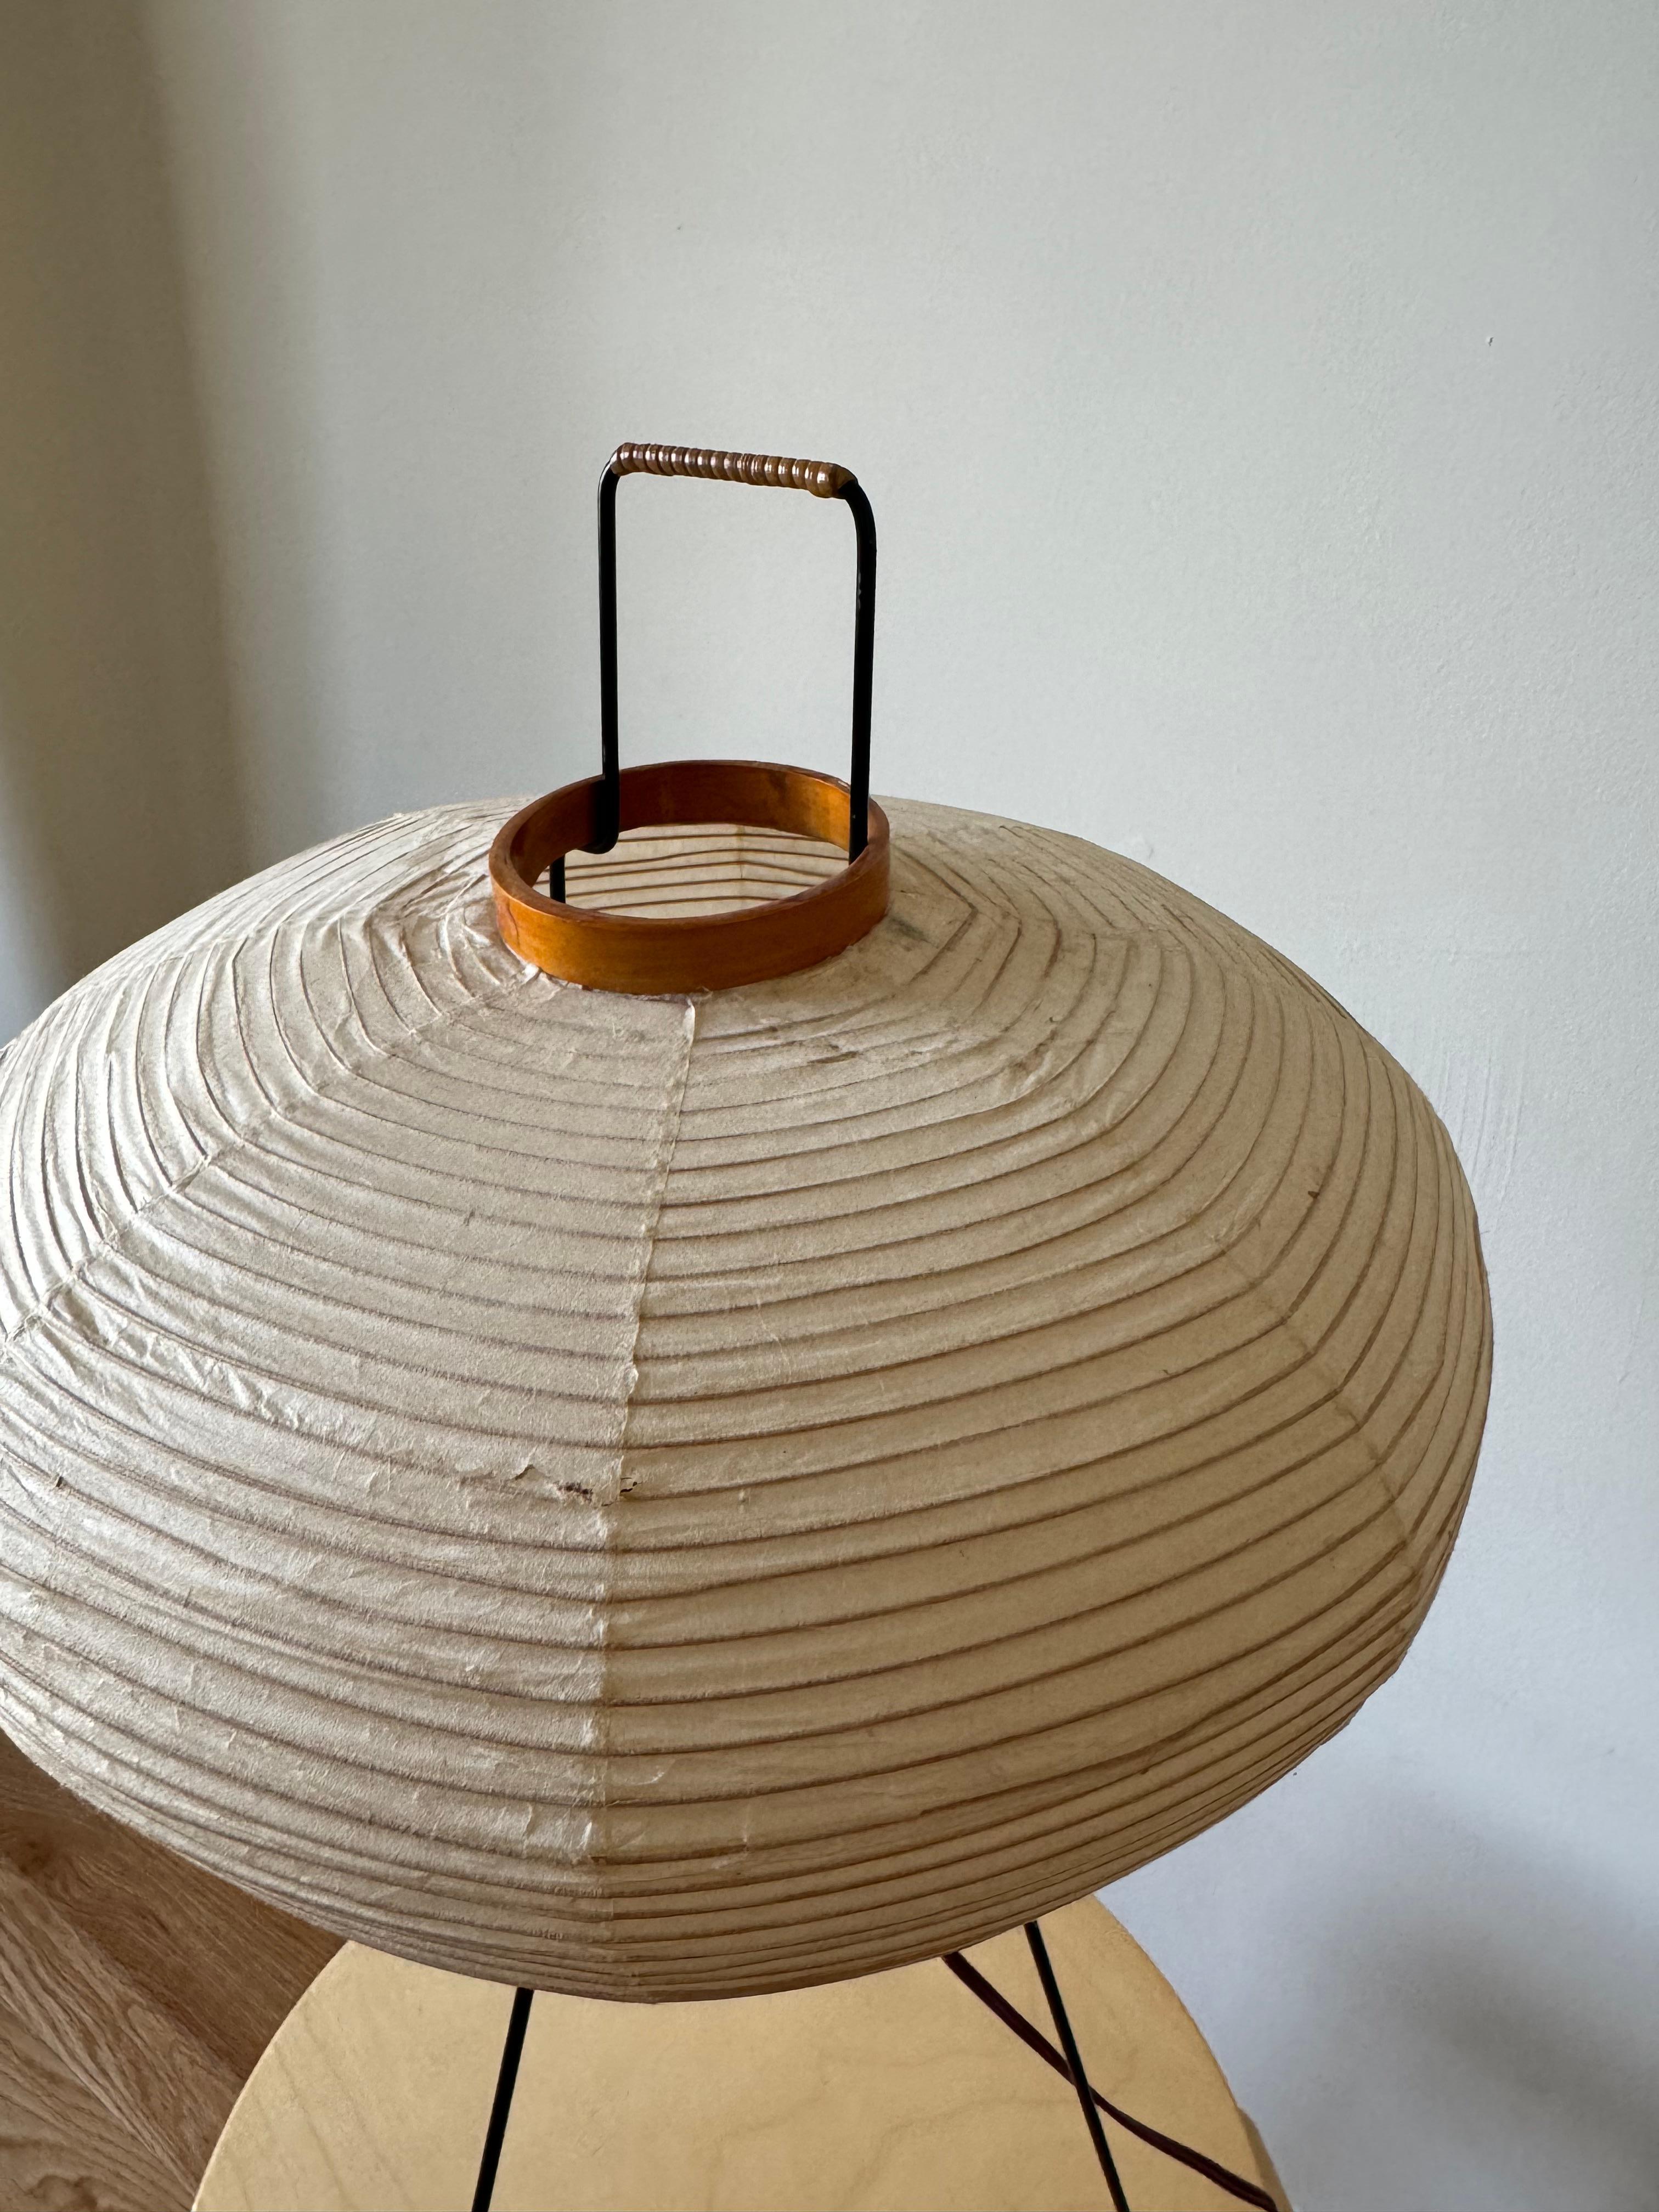 Early Isamu Noguchi Akari Light Sculpture, Model 3A Table Lamp In Fair Condition For Sale In Centreville, VA